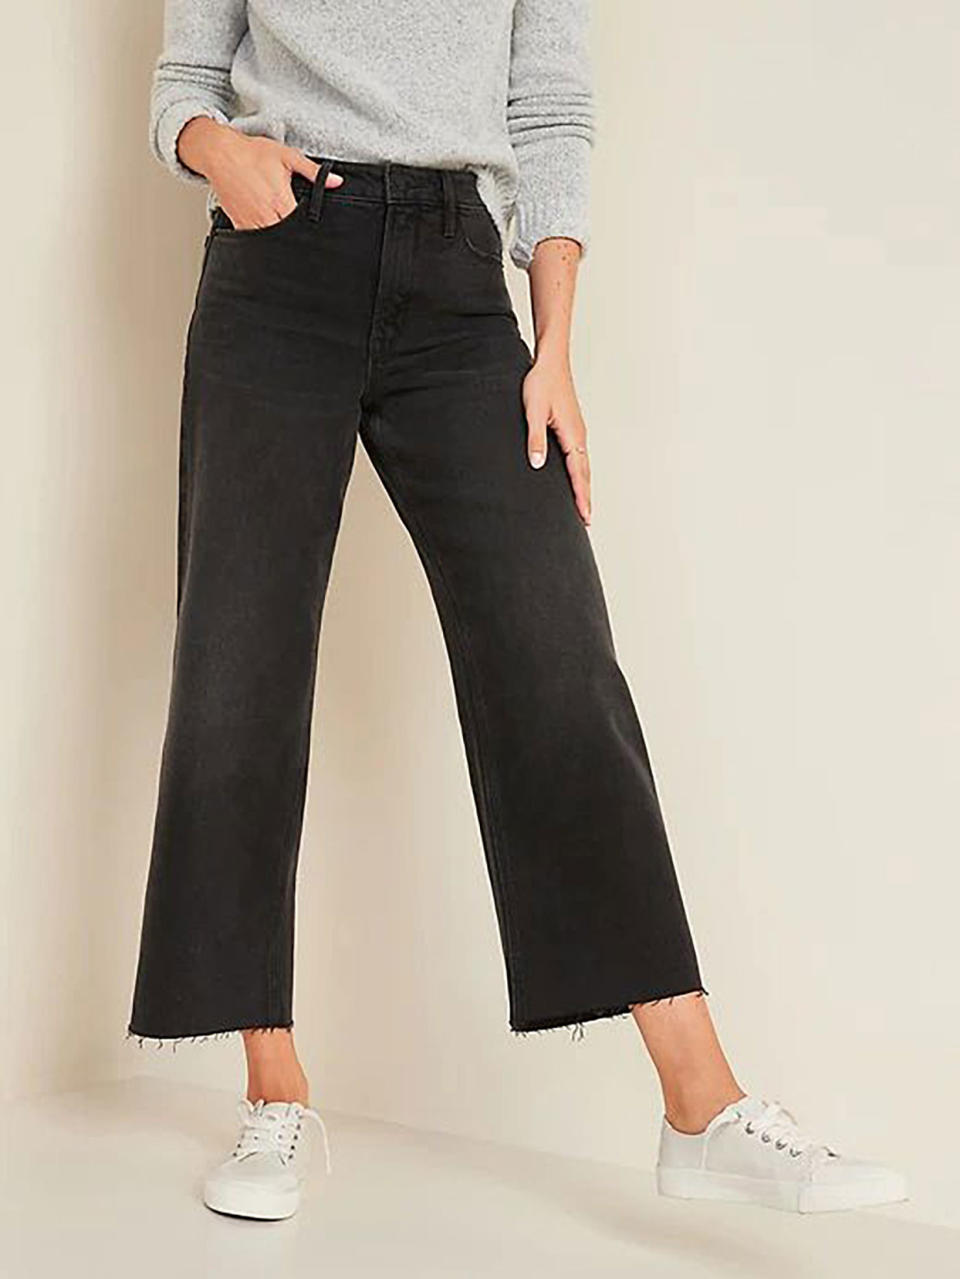 Old Navy High-Waisted, Wide-Leg Cut Off Jeans